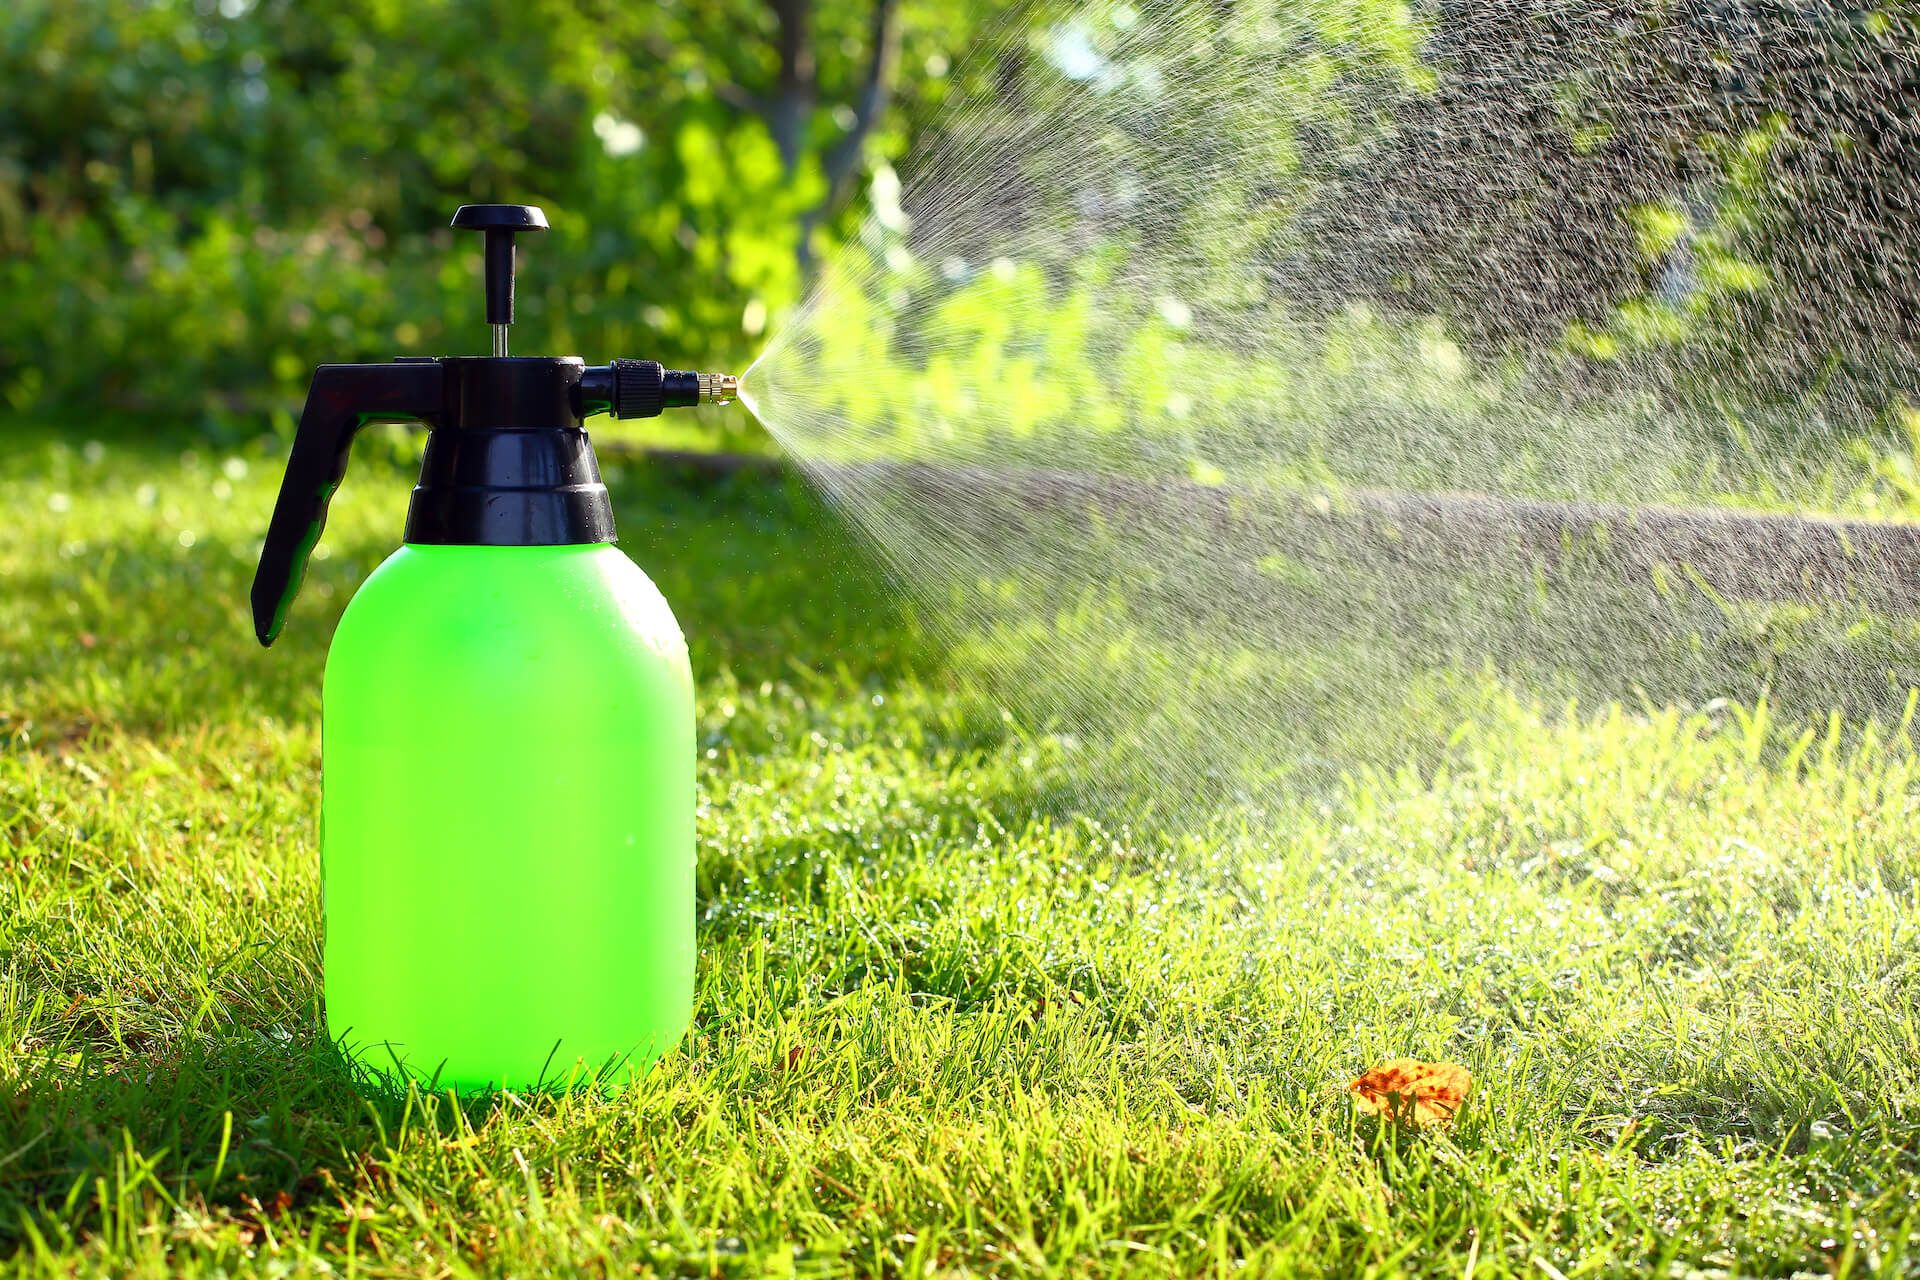 Spray to get rid of weeds in the lawn.